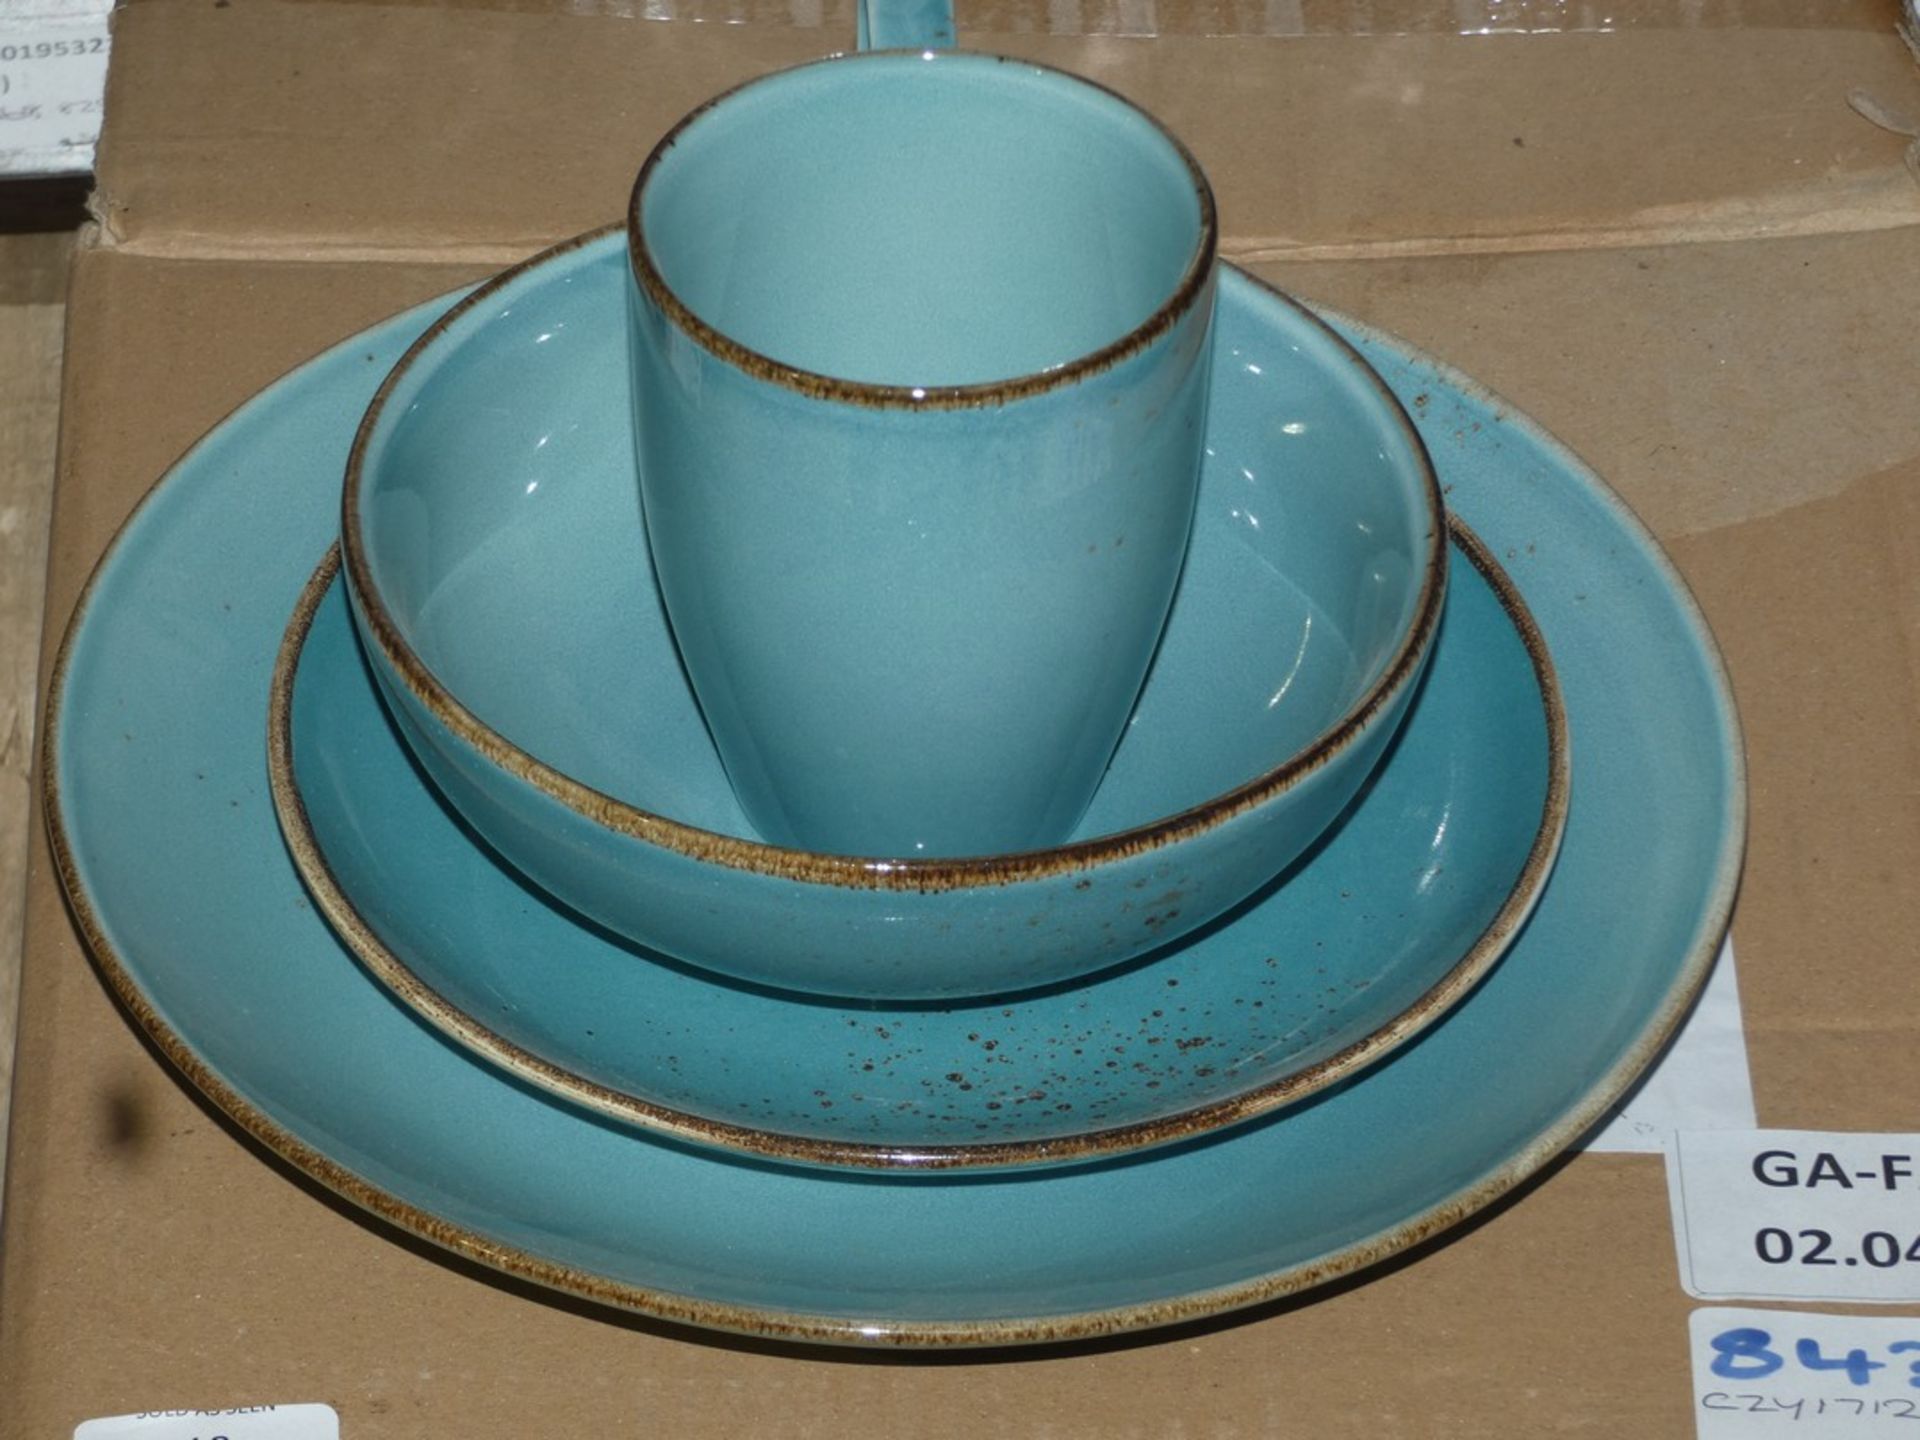 Boxed 4 Piece Replacement Dinner Set to Include 1 Cup, 1 Saucer, 1 Dinner Plate and 1 Bowl RRP £